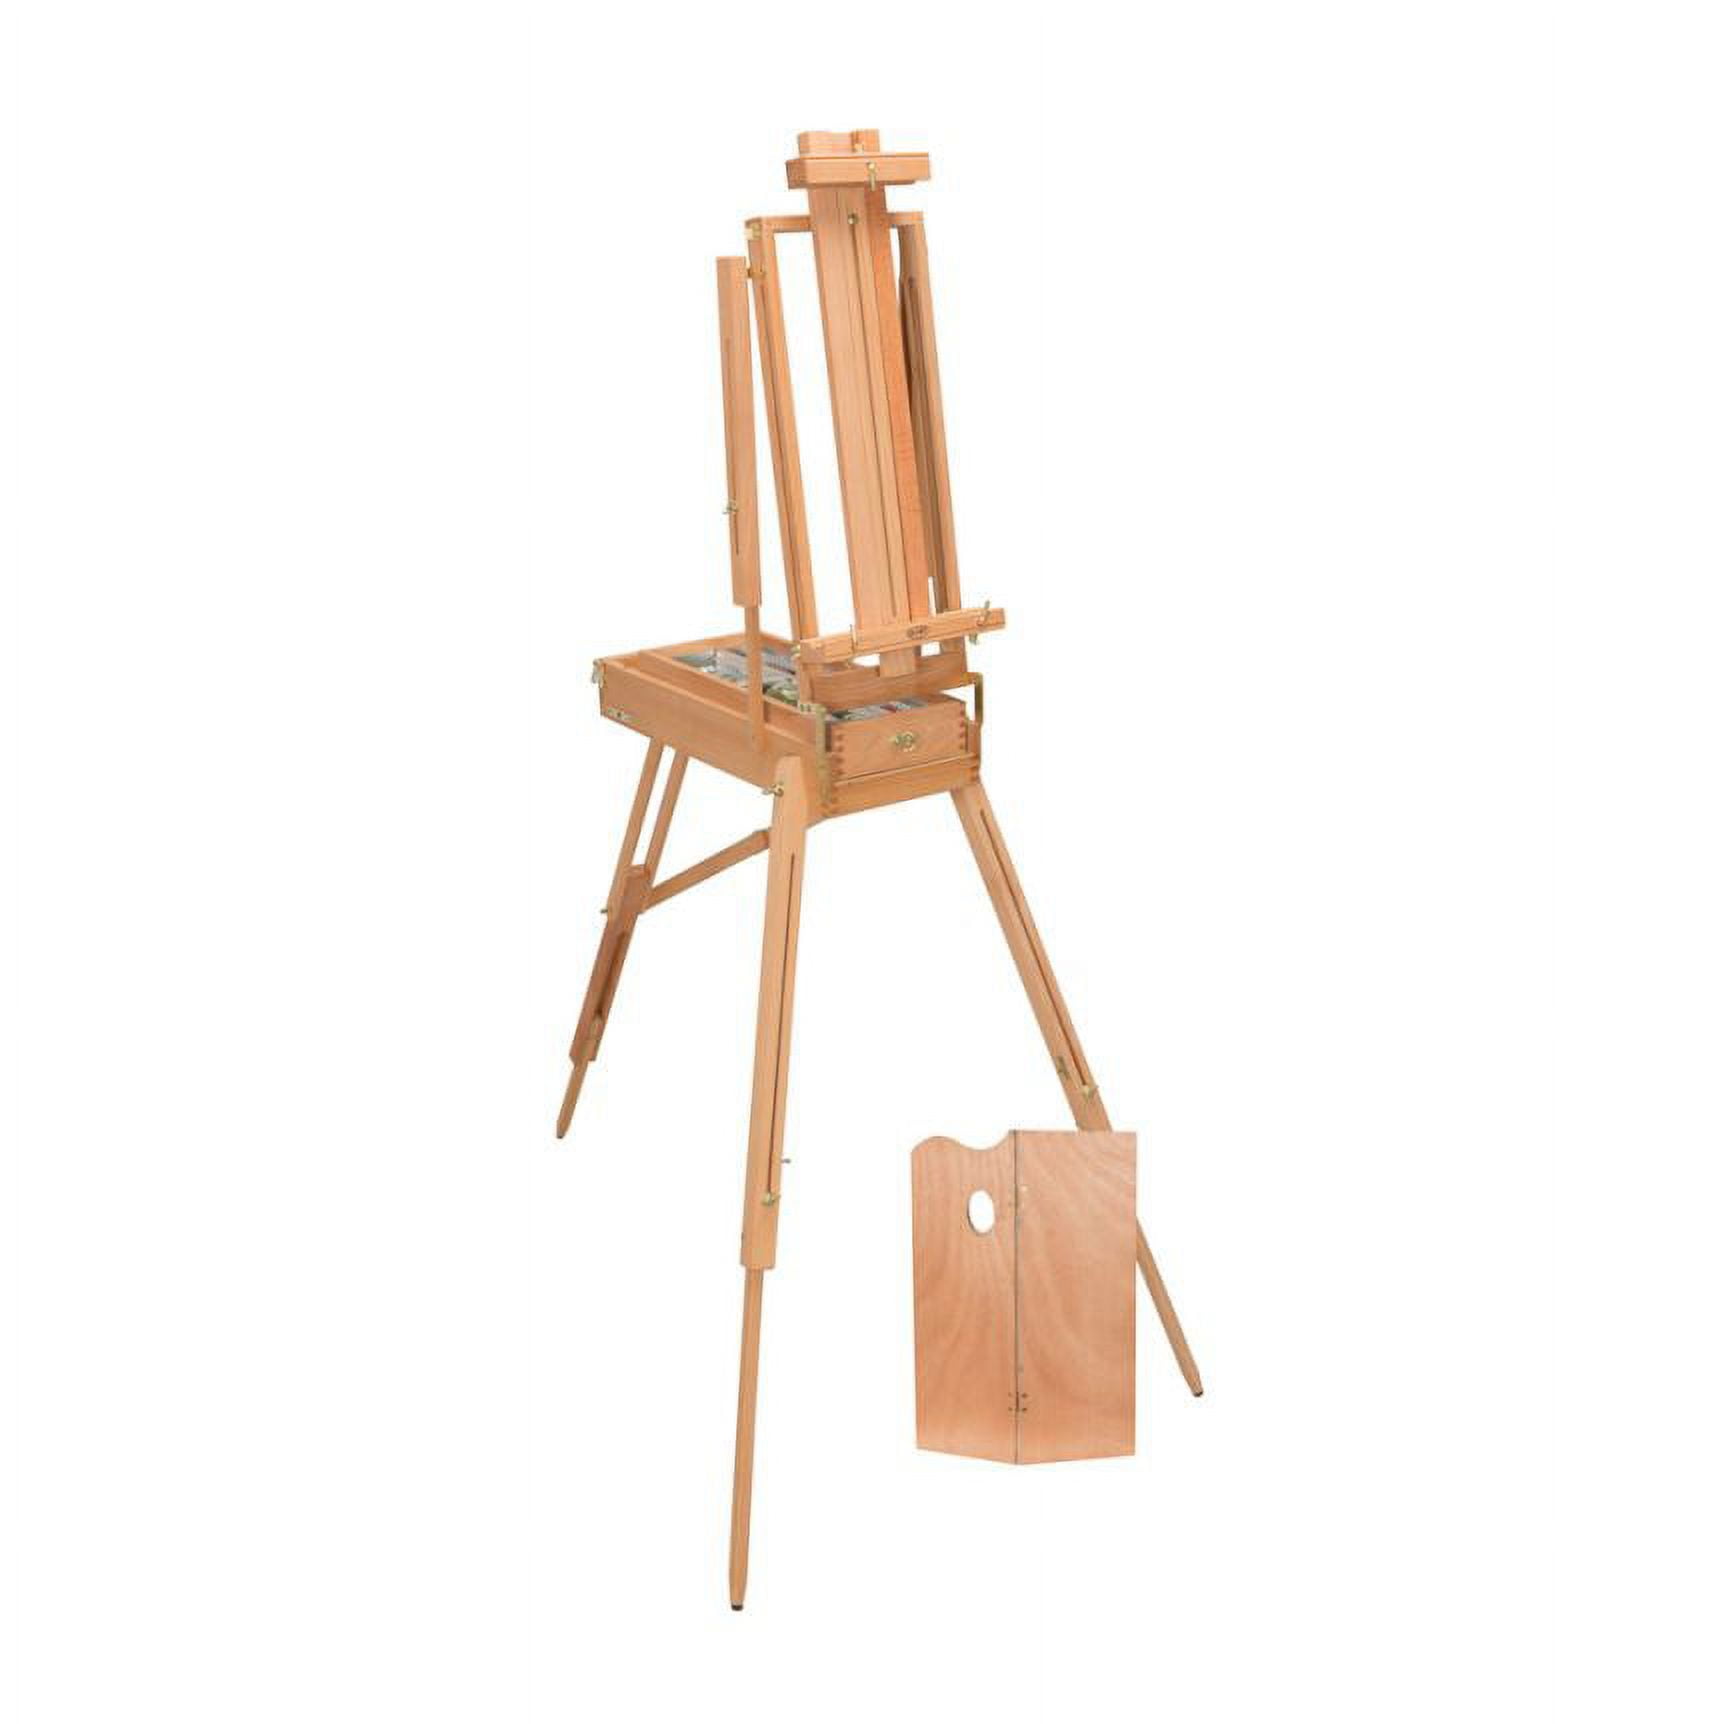 Wooden Easel, 19th Century For Sale at 1stDibs  easel stand in spanish,  antique wooden easel for sale, fancy easel